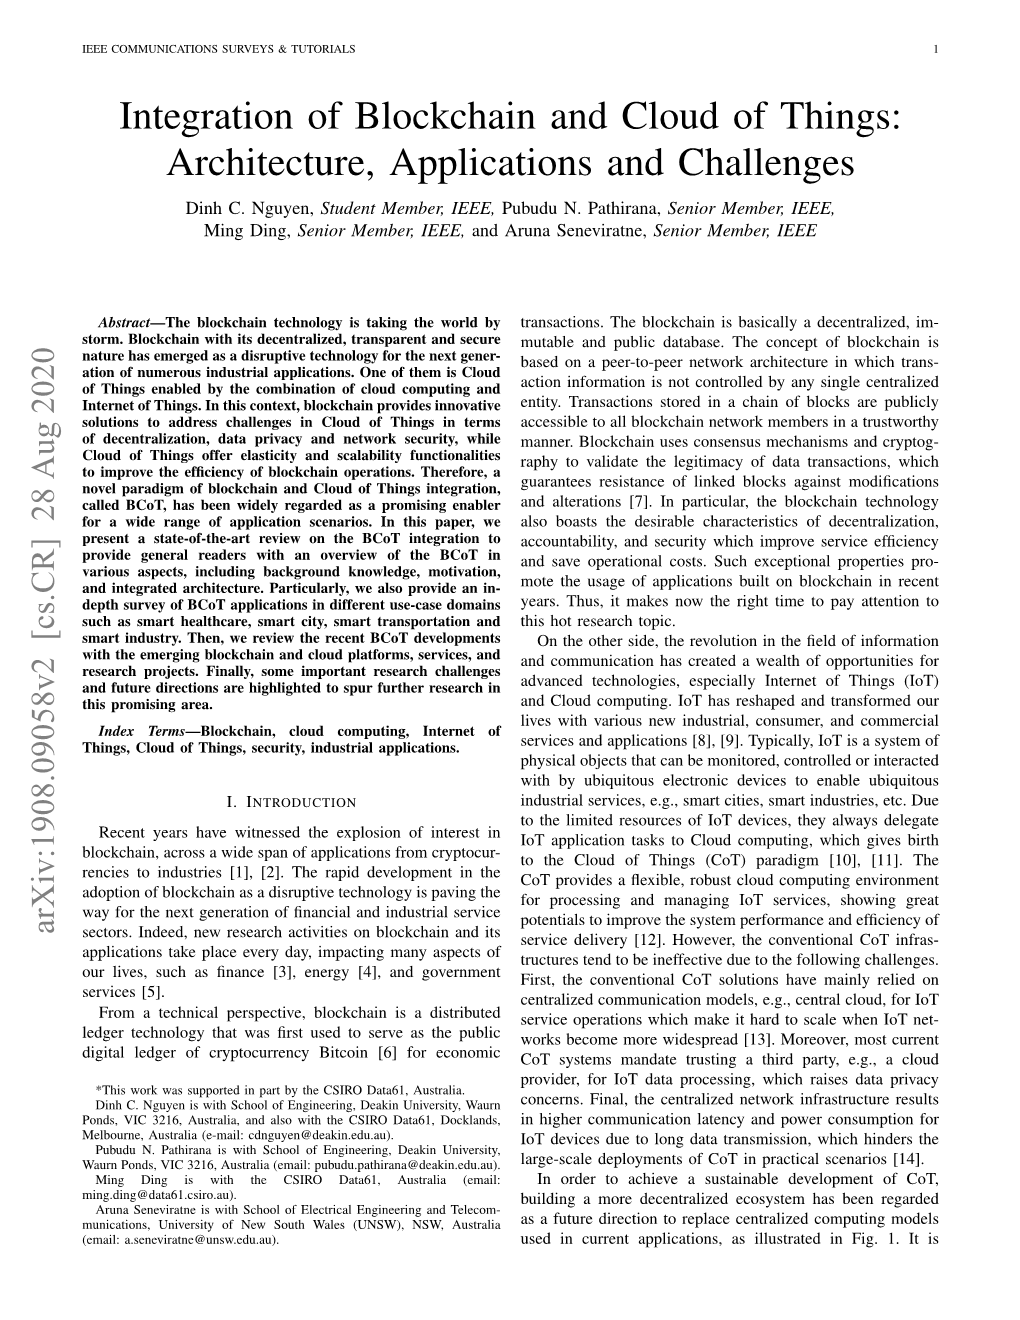 Integration of Blockchain and Cloud of Things: Architecture, Applications and Challenges Dinh C